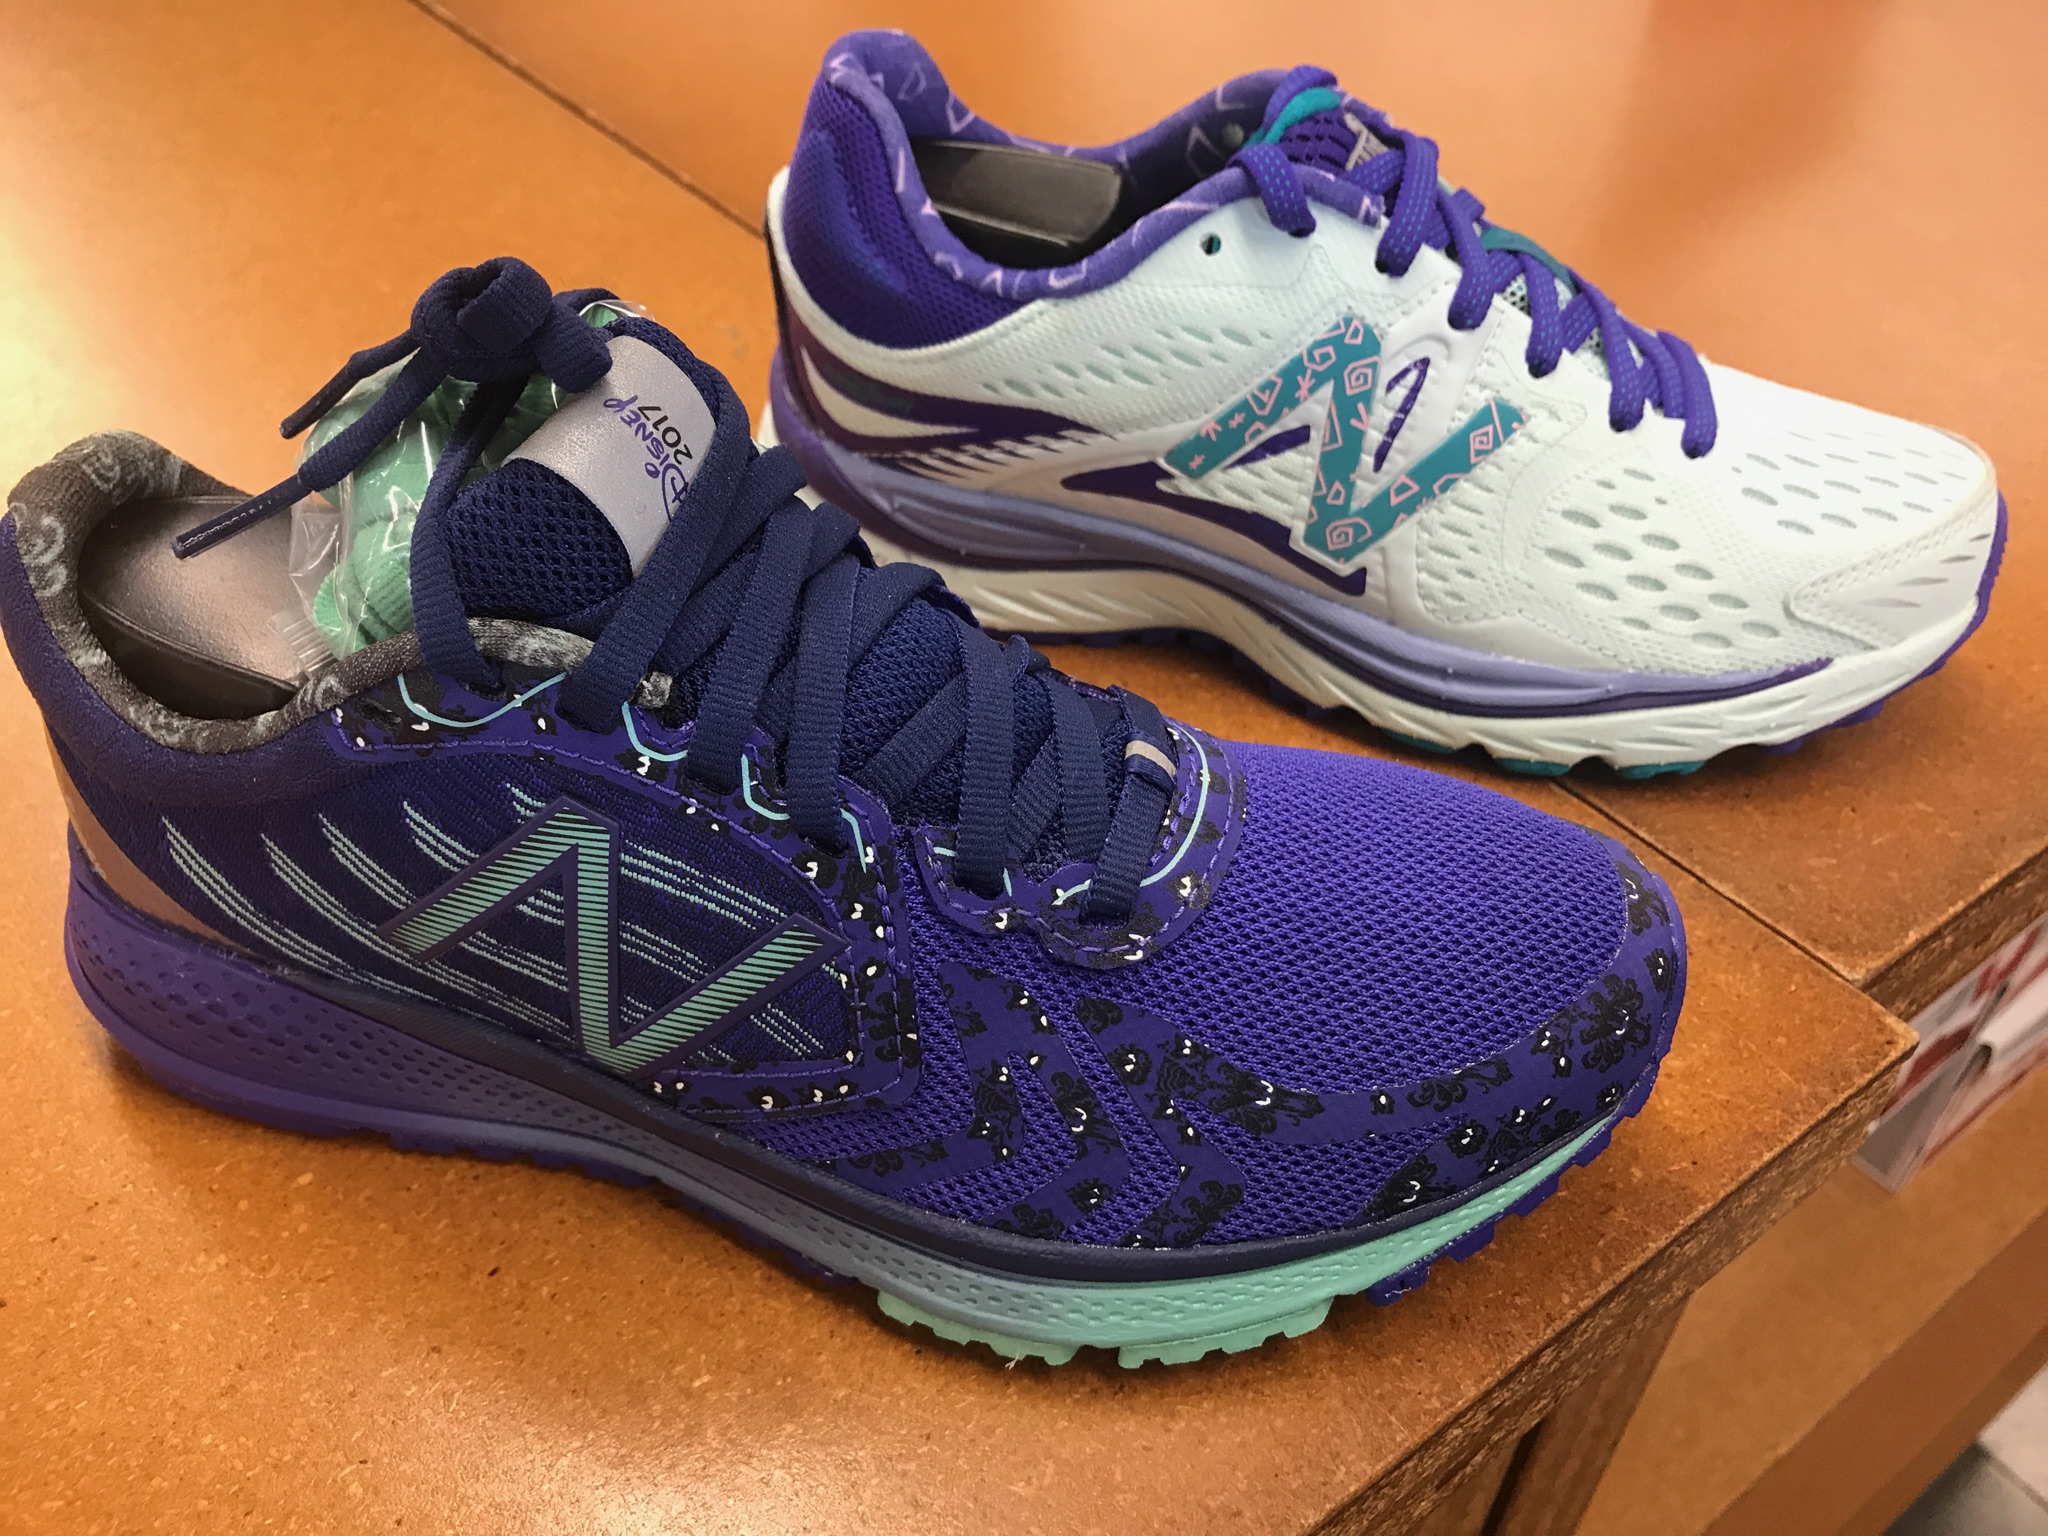 Flash Sale! Learn How To Get Your runDisney New Balance Sneakers At ...